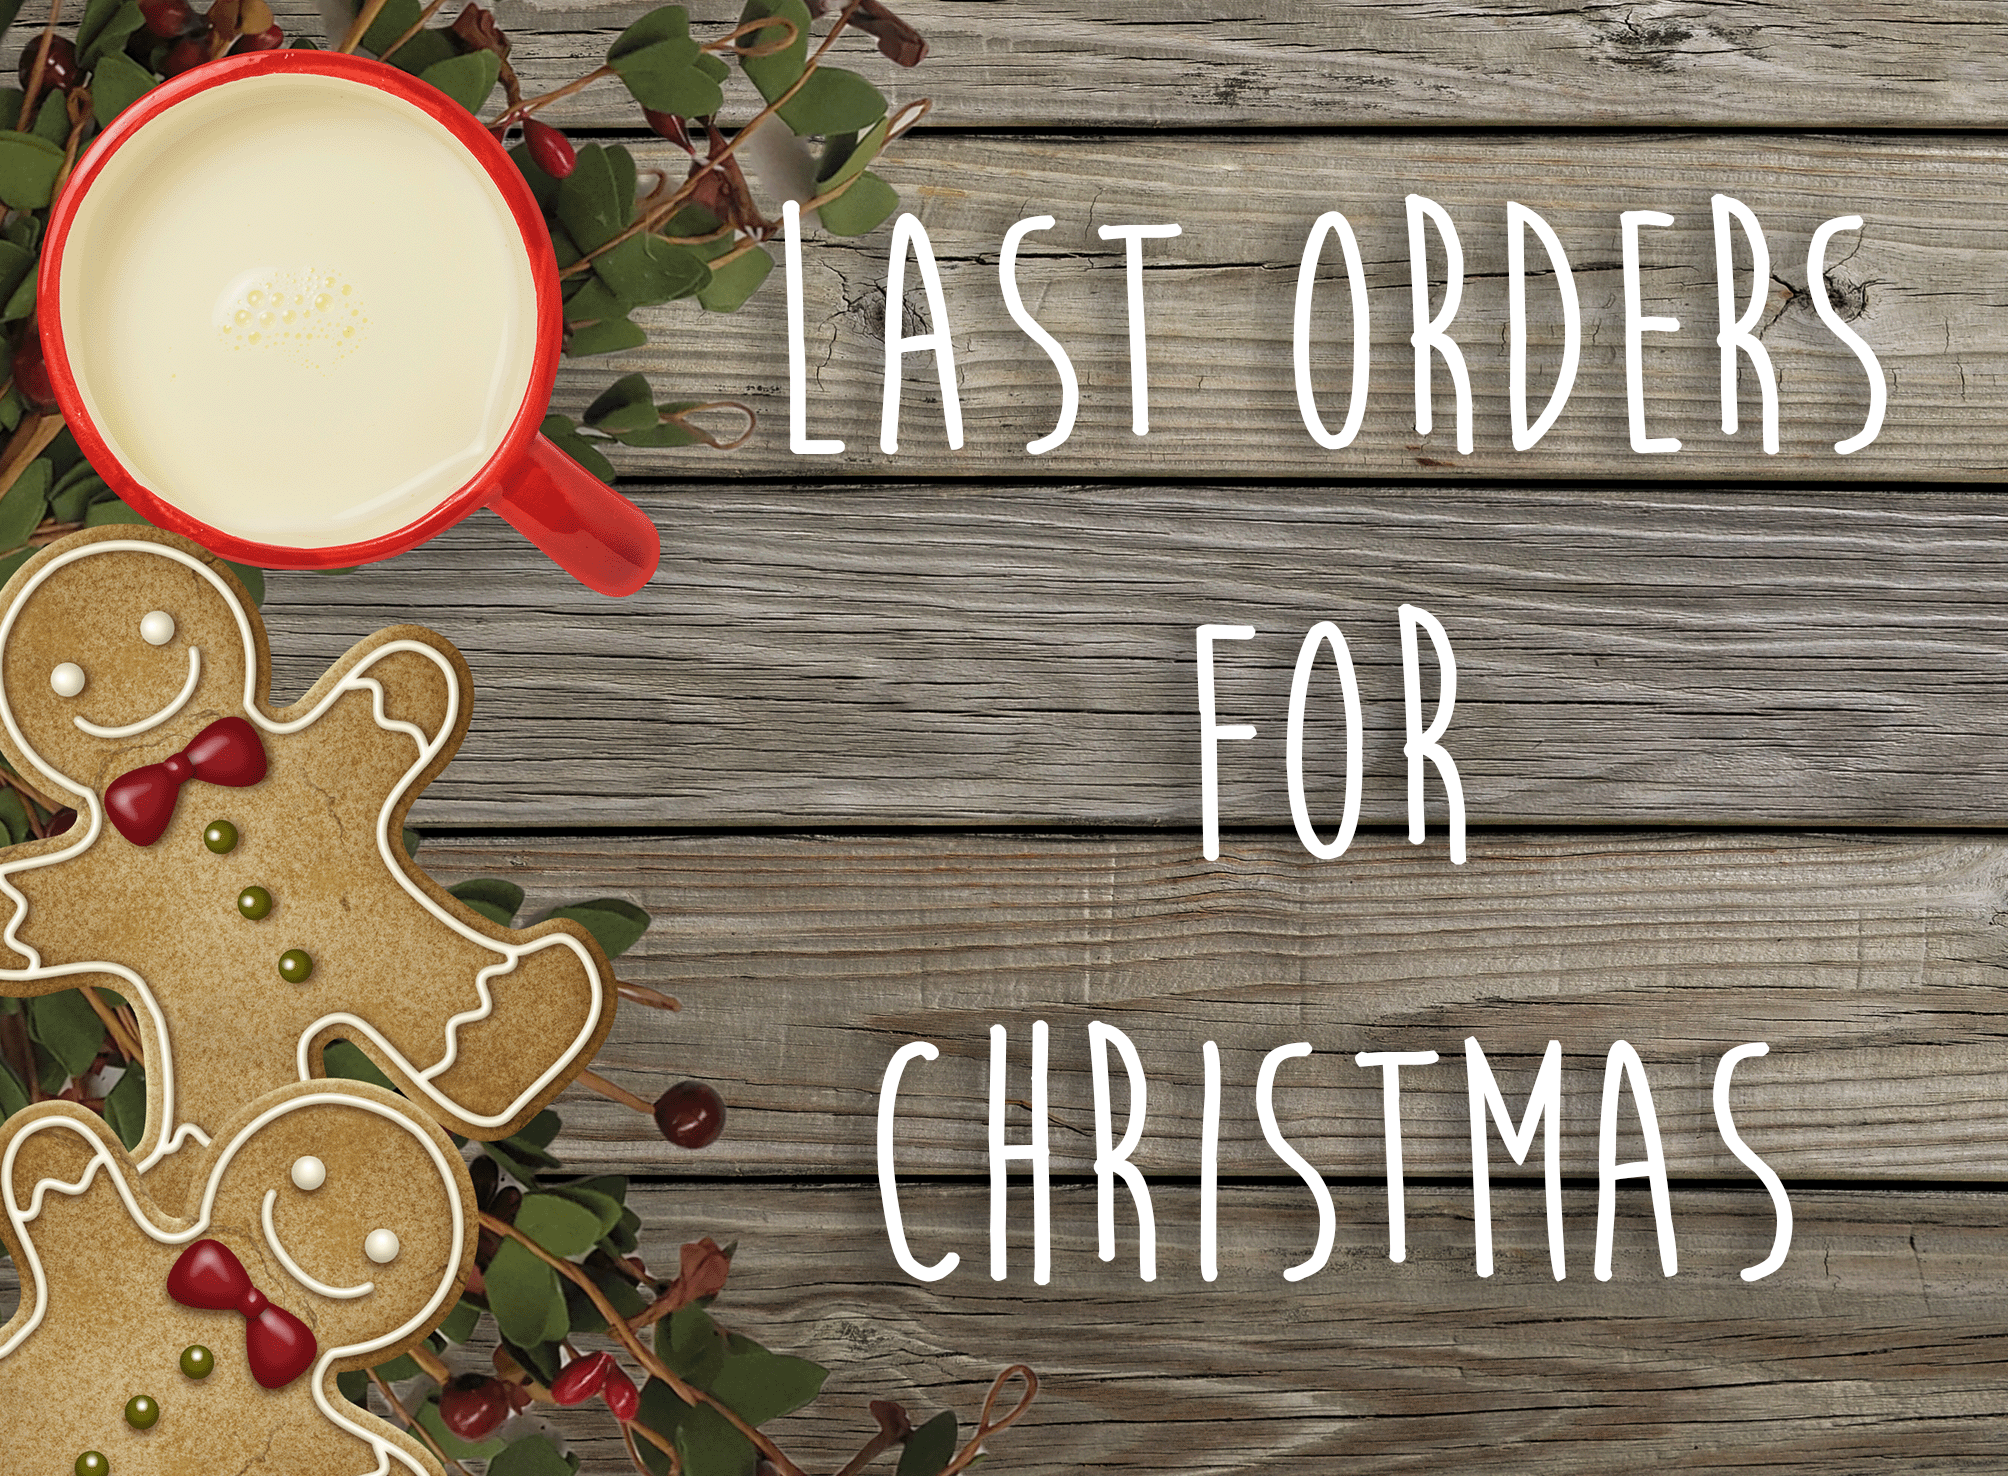 LAST ORDERS FOR CHRISTMAS!